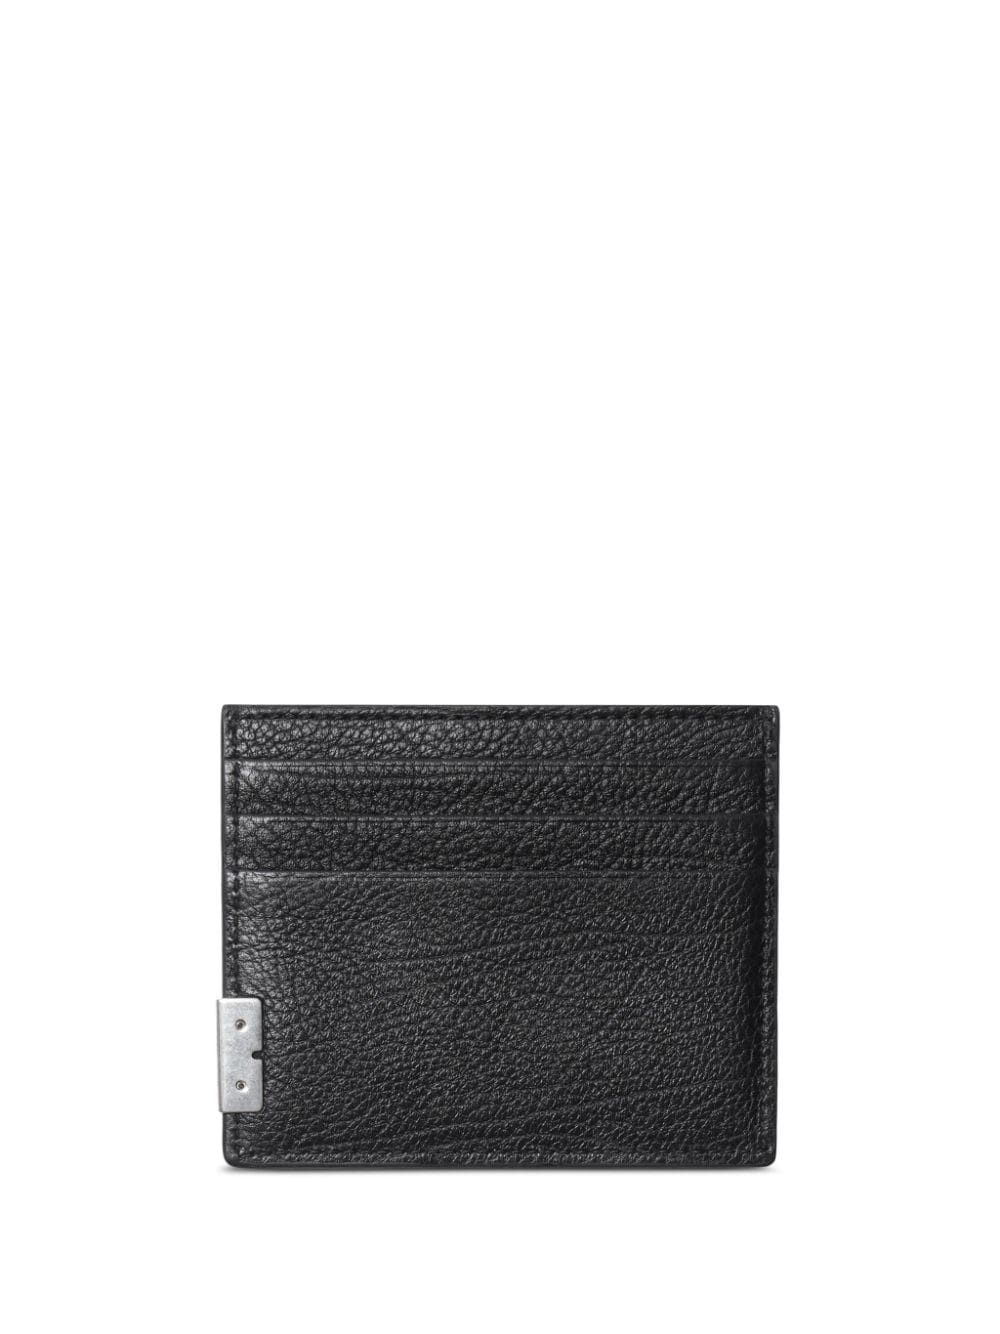 grained-texture leather cardholder - 2